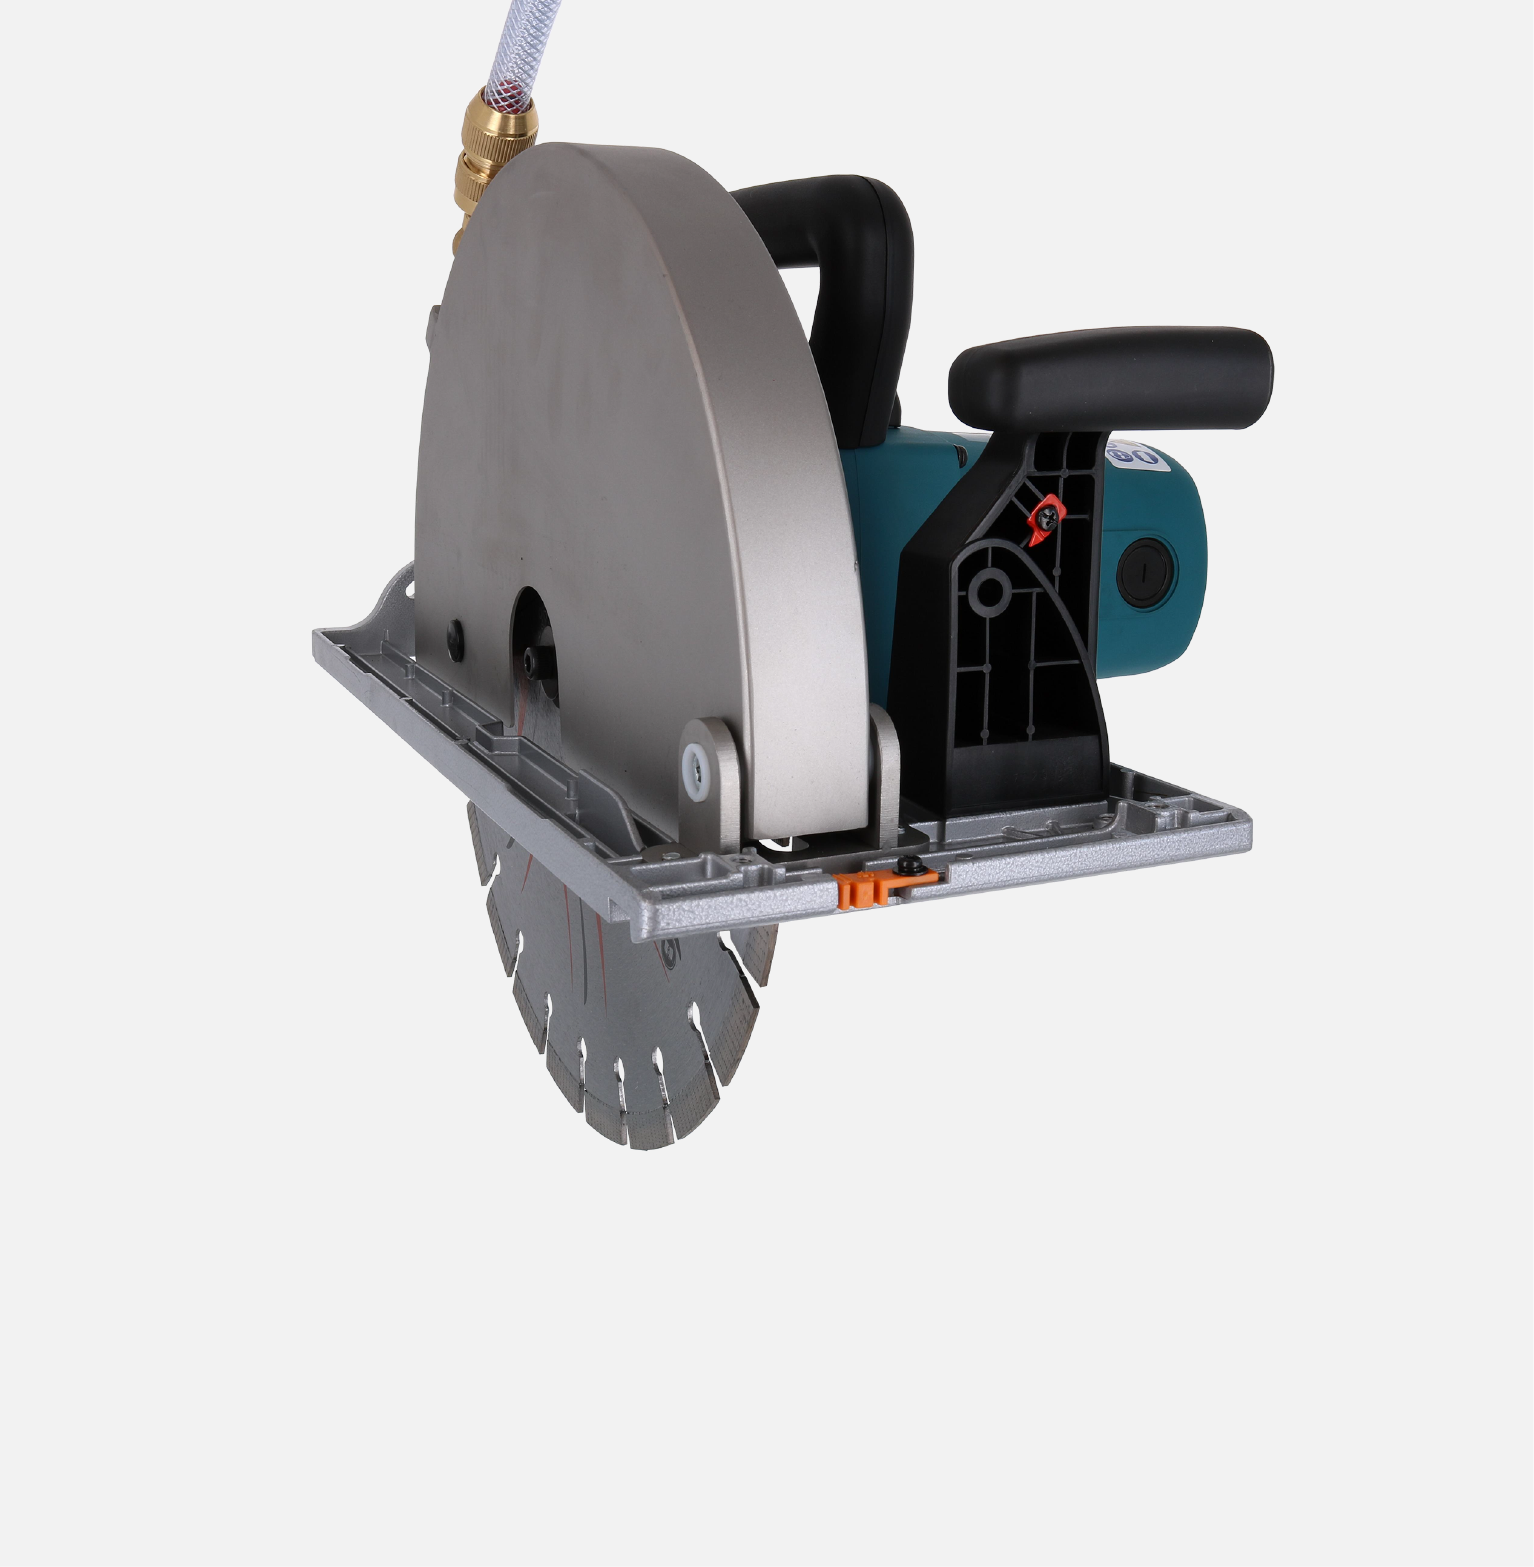 Product category - Handheld wall saws